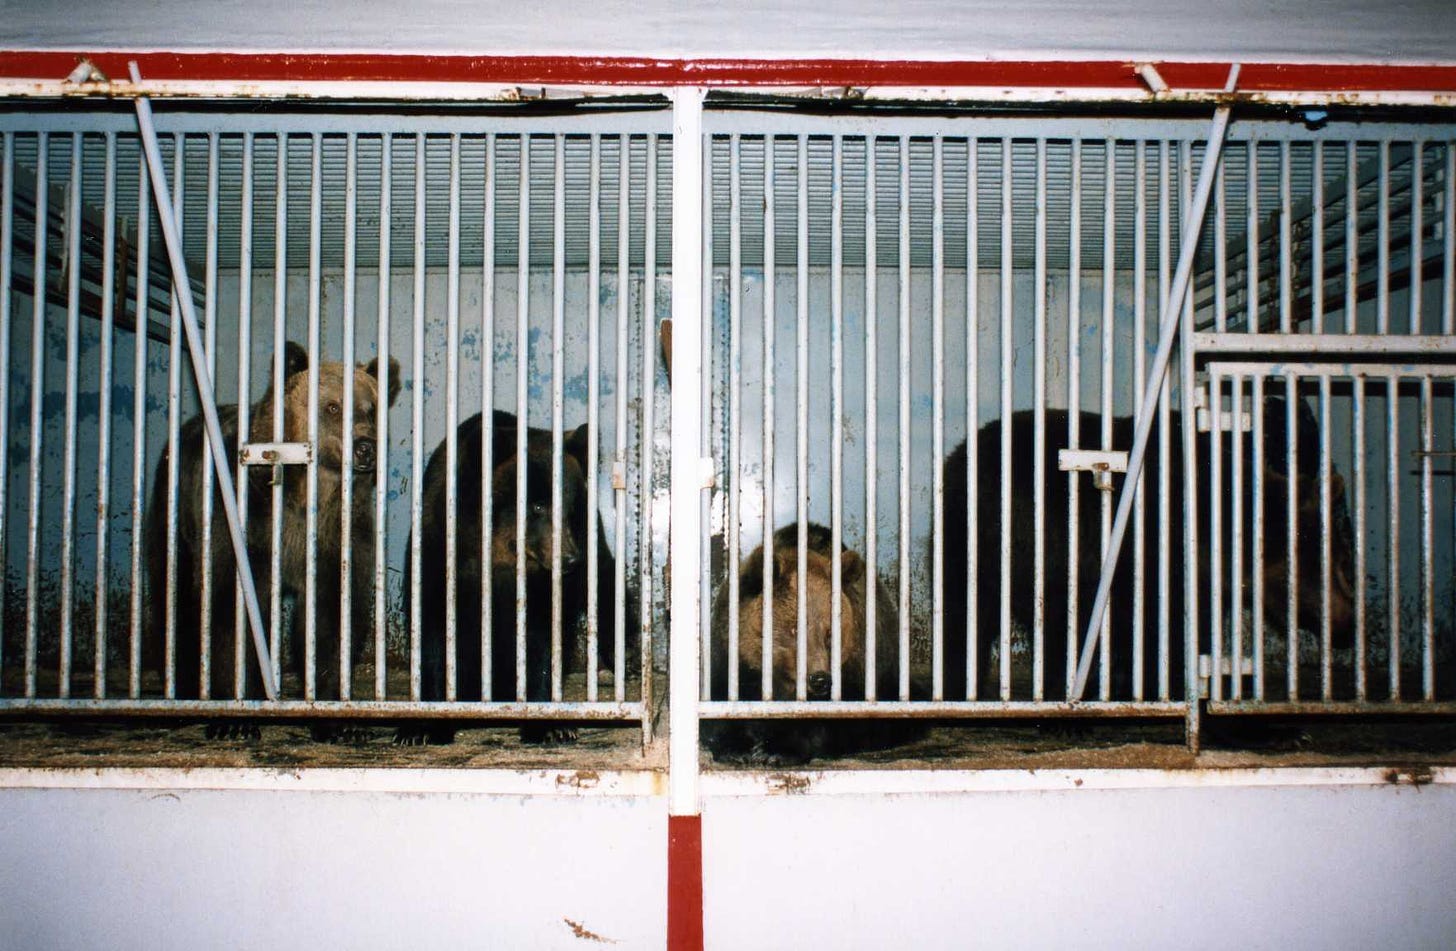 Circus bears in cages